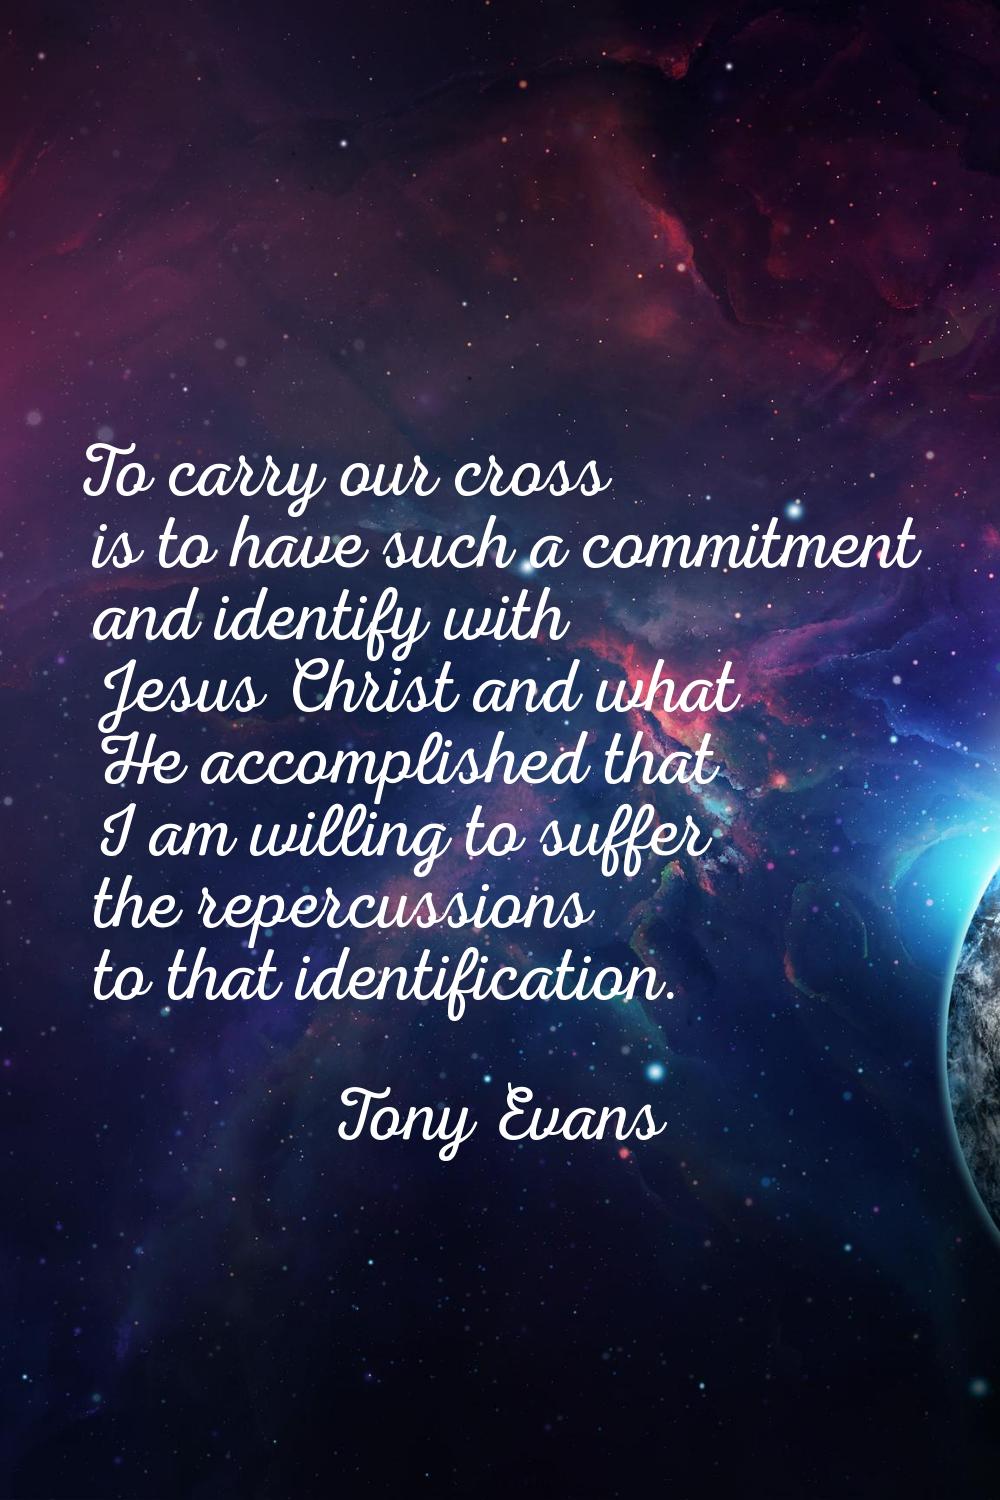 To carry our cross is to have such a commitment and identify with Jesus Christ and what He accompli